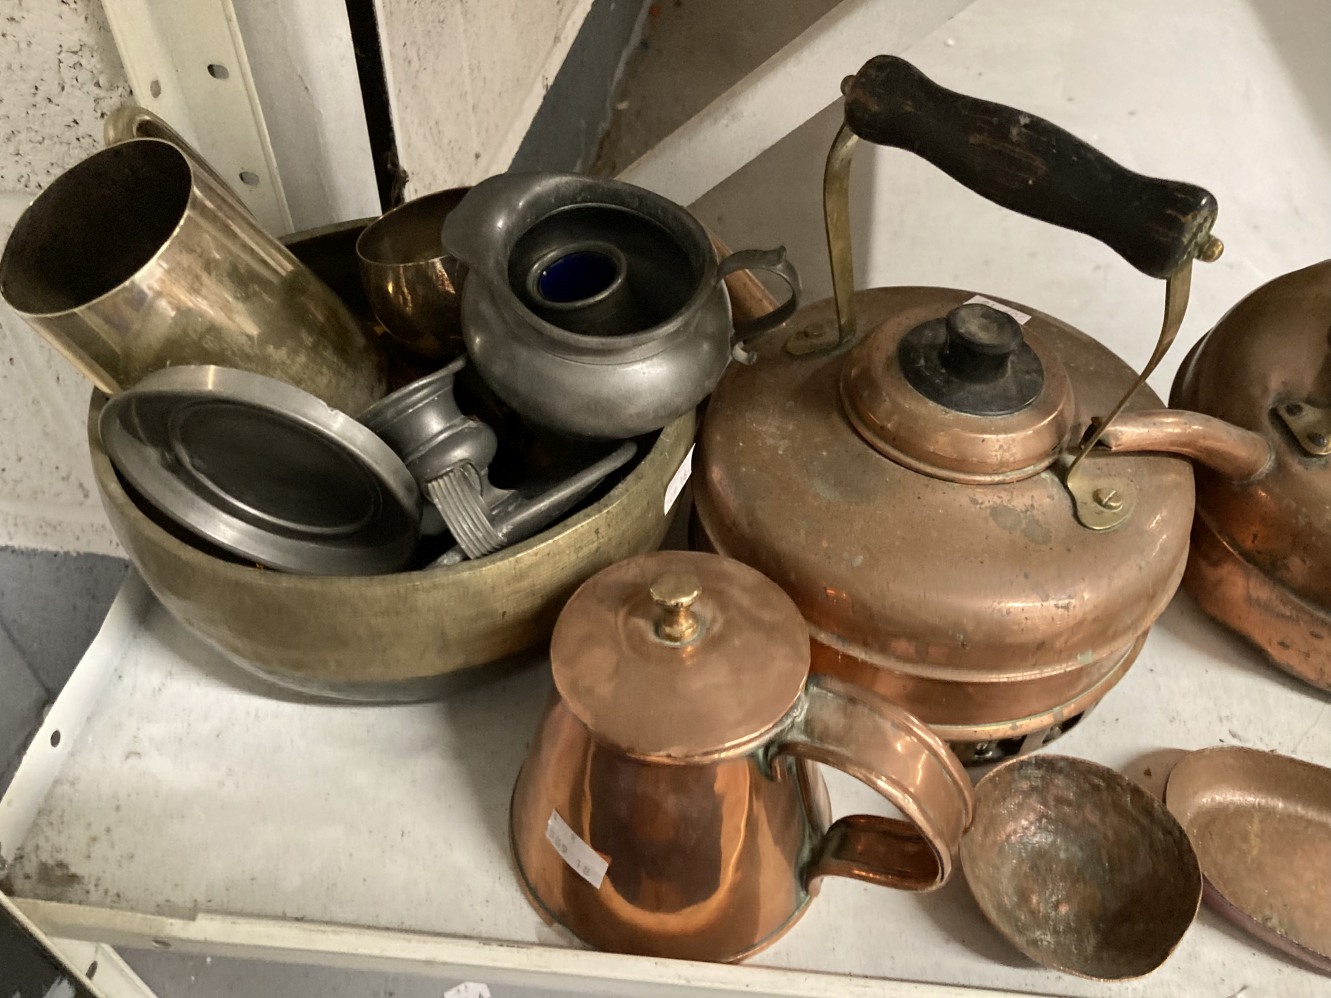 19th/20th cent. Metalware: Copper kettles x 2, chocolate and other pots, decorative mugs x 2, dishes - Image 2 of 3